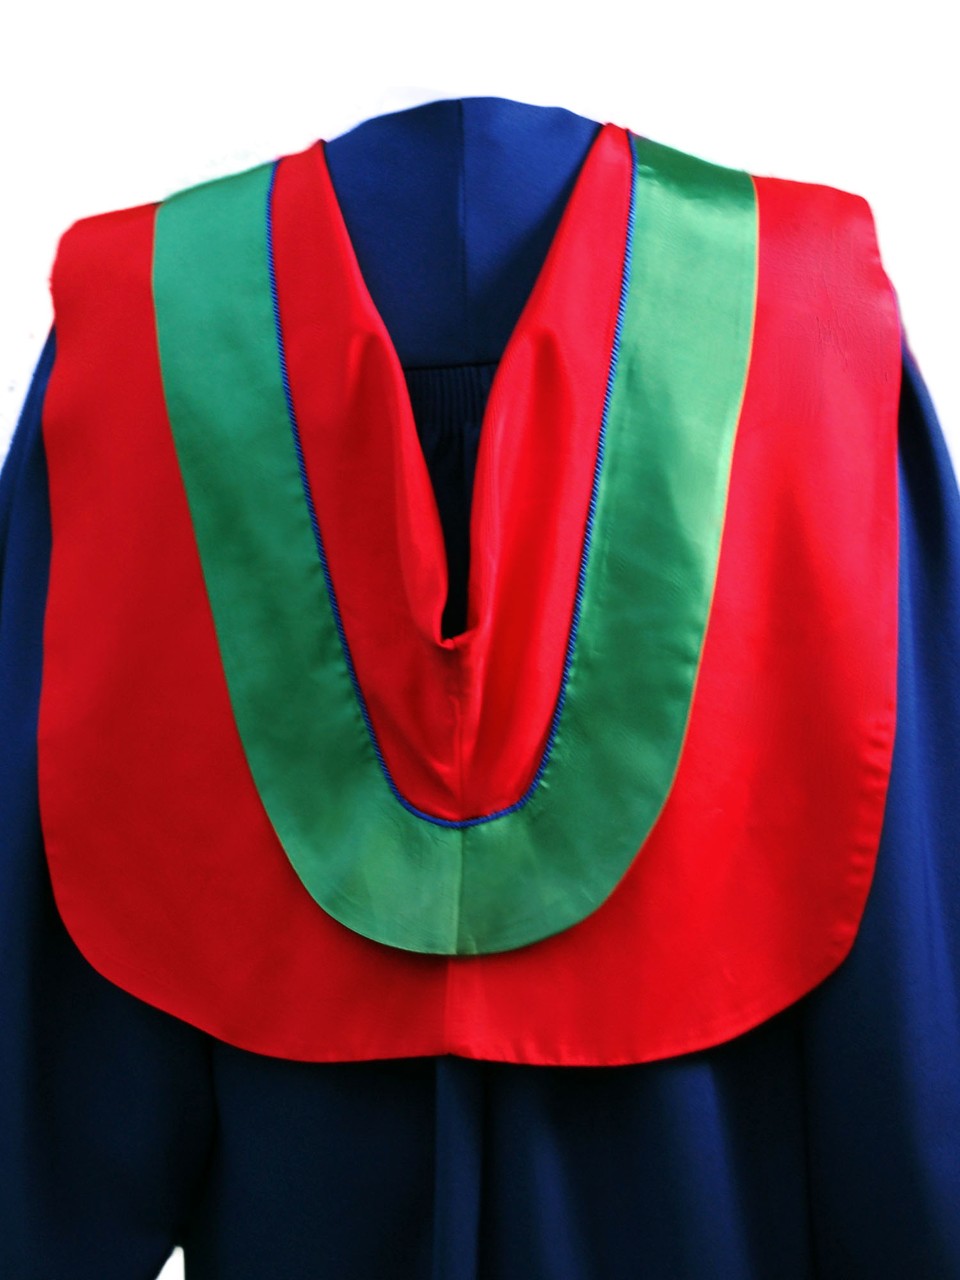 The Master of Arts in the Faculty of Communication, Art and Technology hood is red with wide green border, royal blue cording